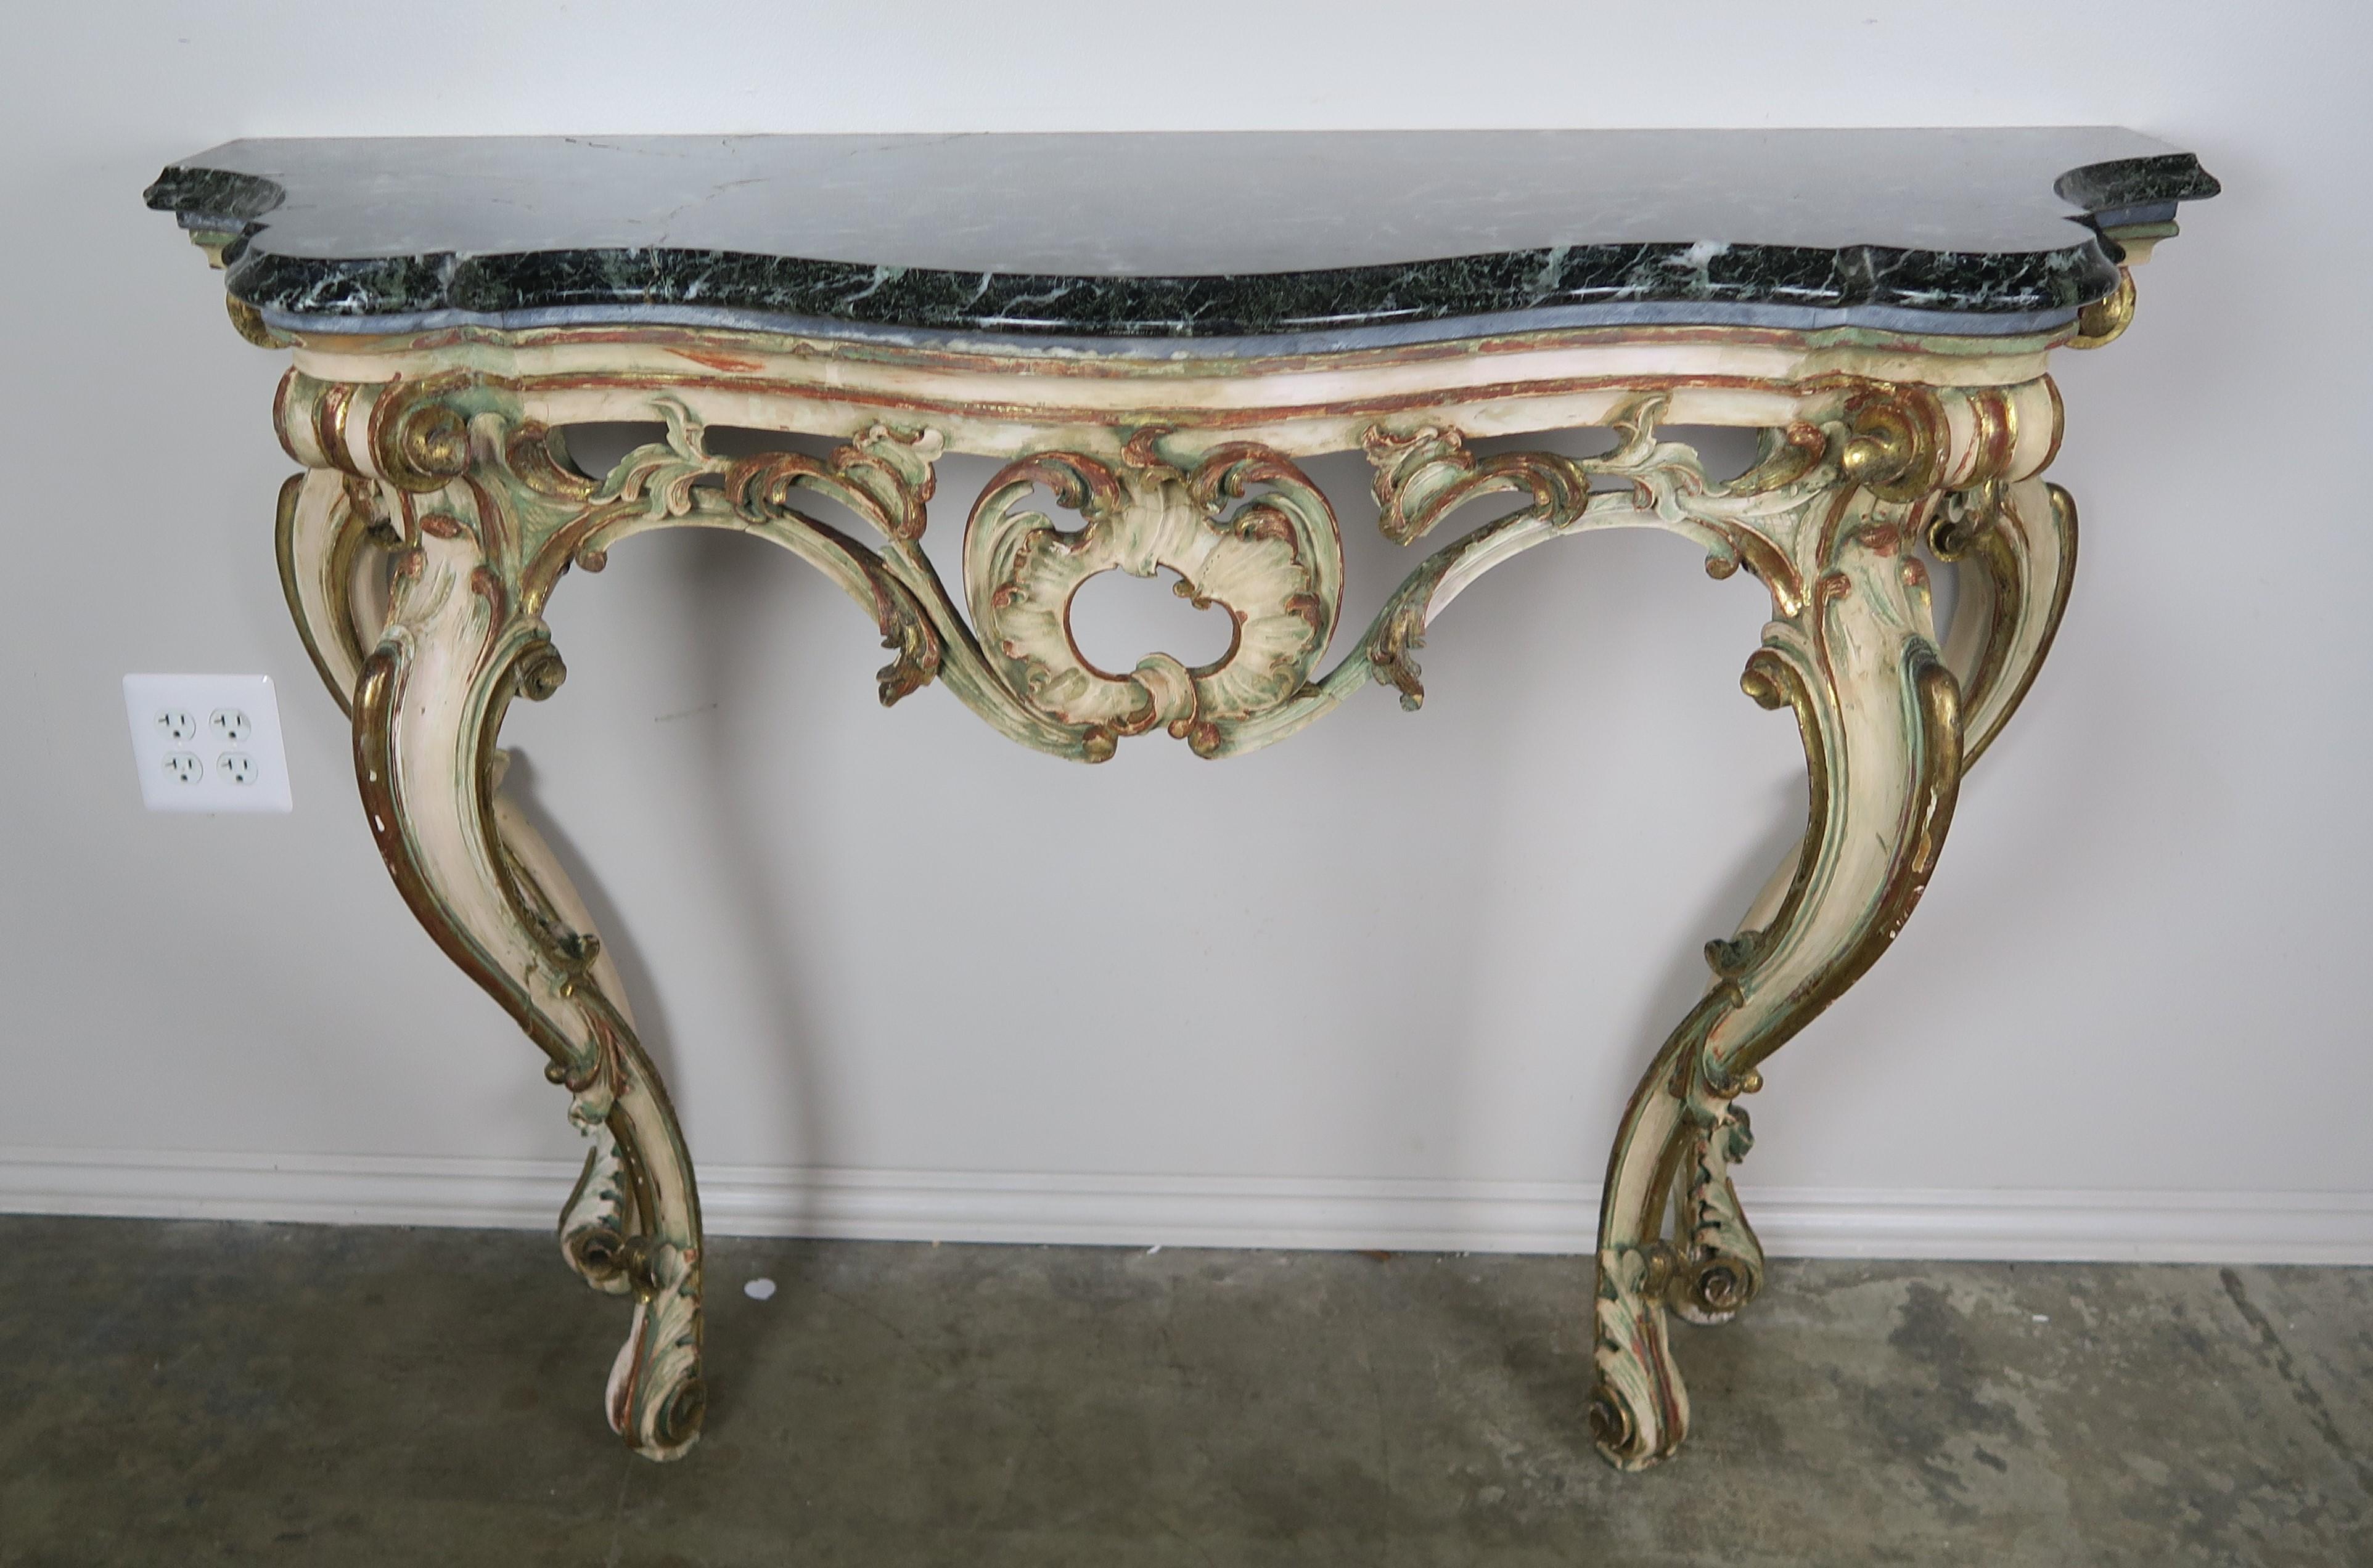 French Serpentine shaped painted and parcel-gilt console with carved center cartouche flanked by swirling acanthus leaves. The console stands on four cabriole legs that end in ram's head feet with more carved acanthus leaves. The dark green